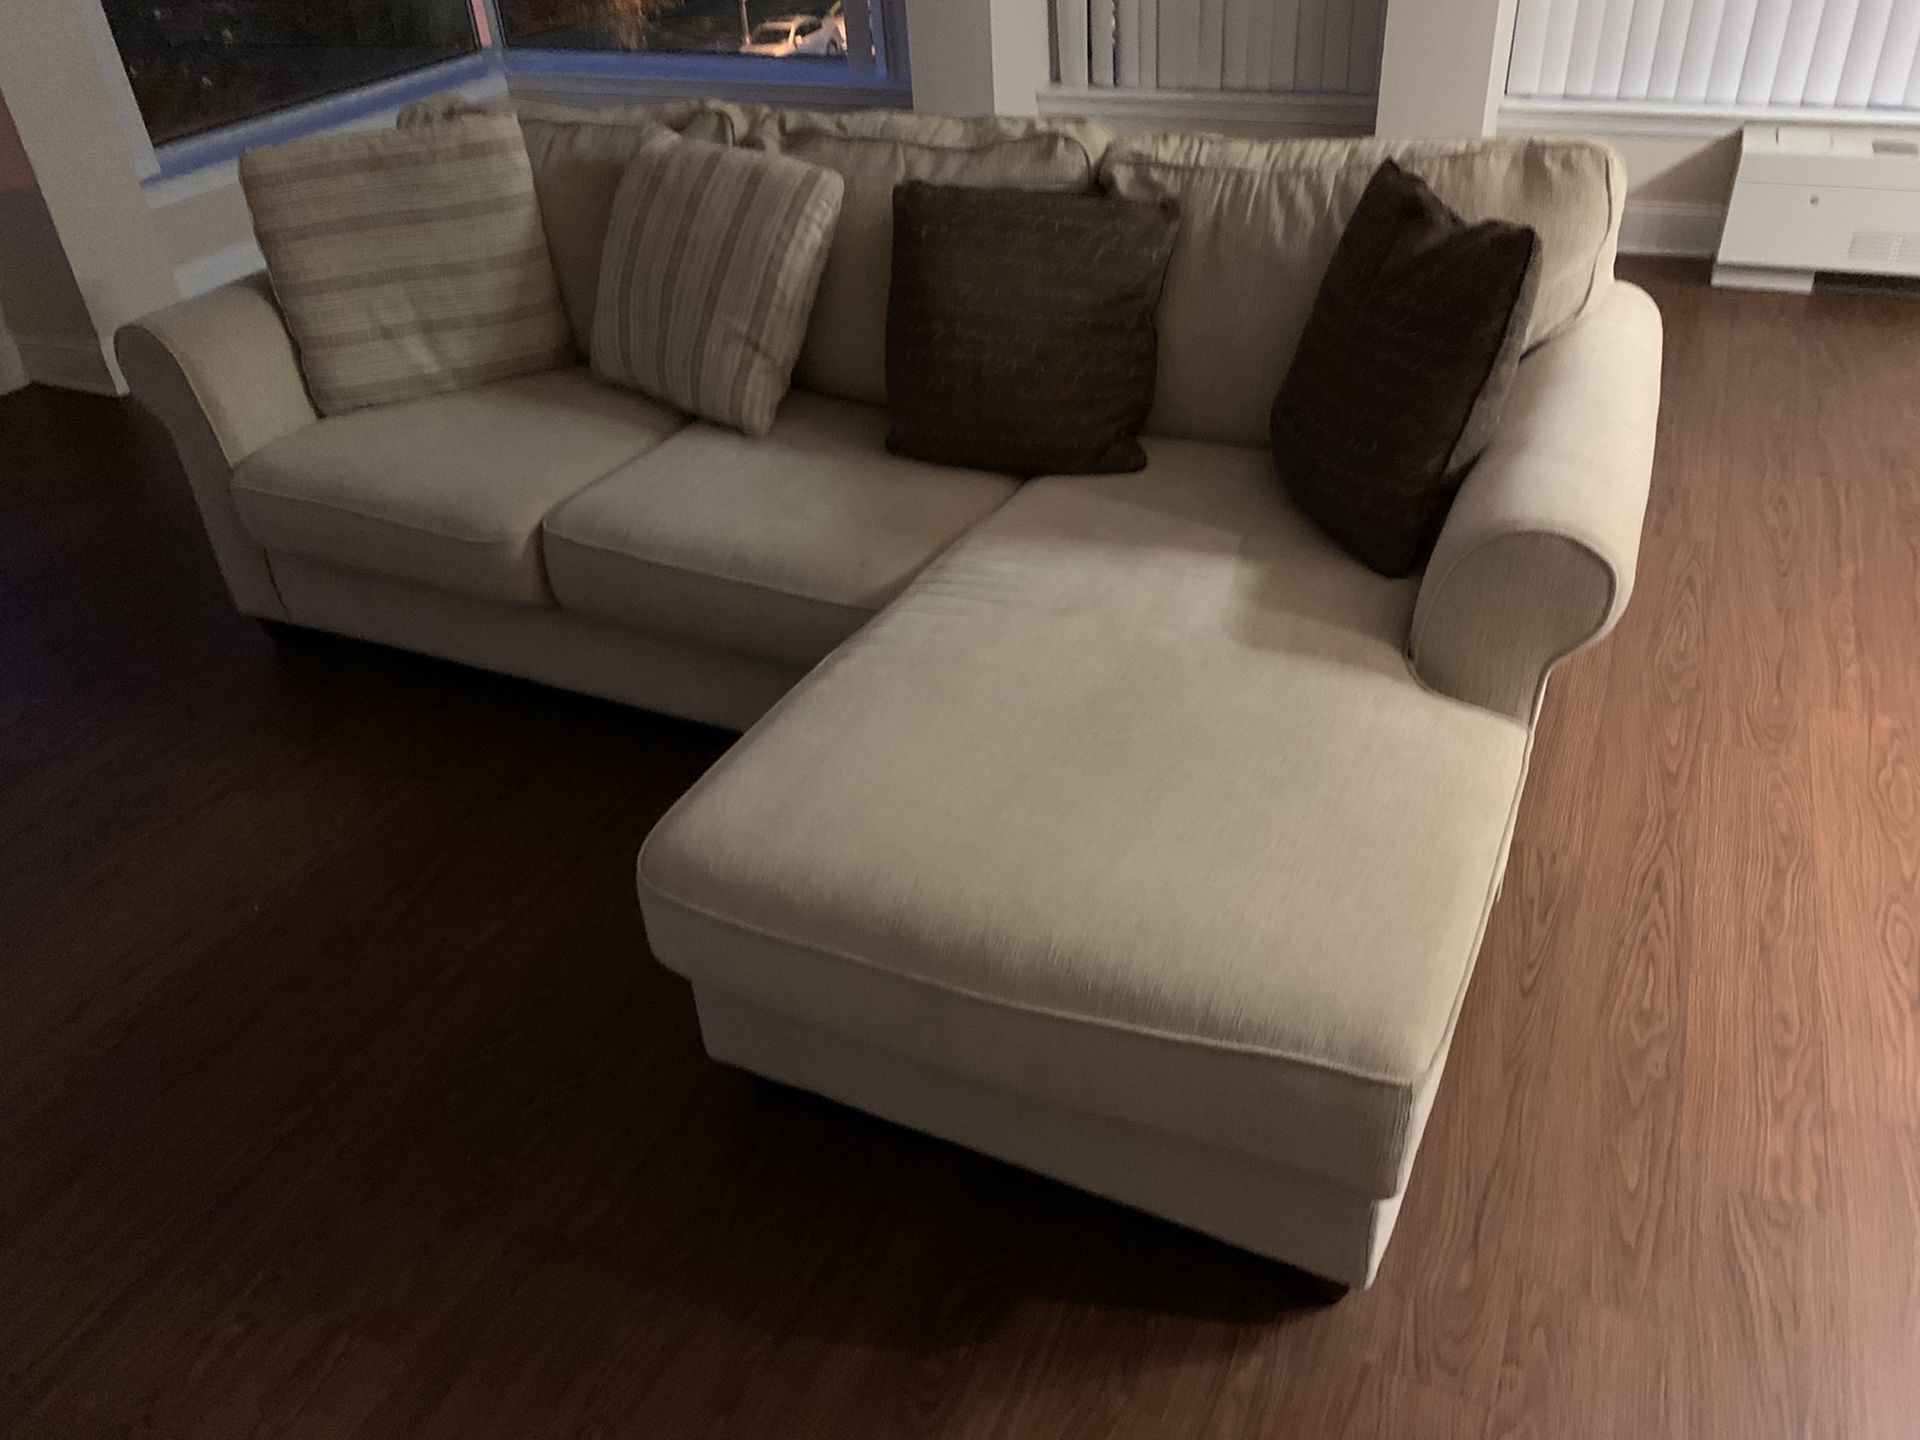 REALLY NICE COUCH $250